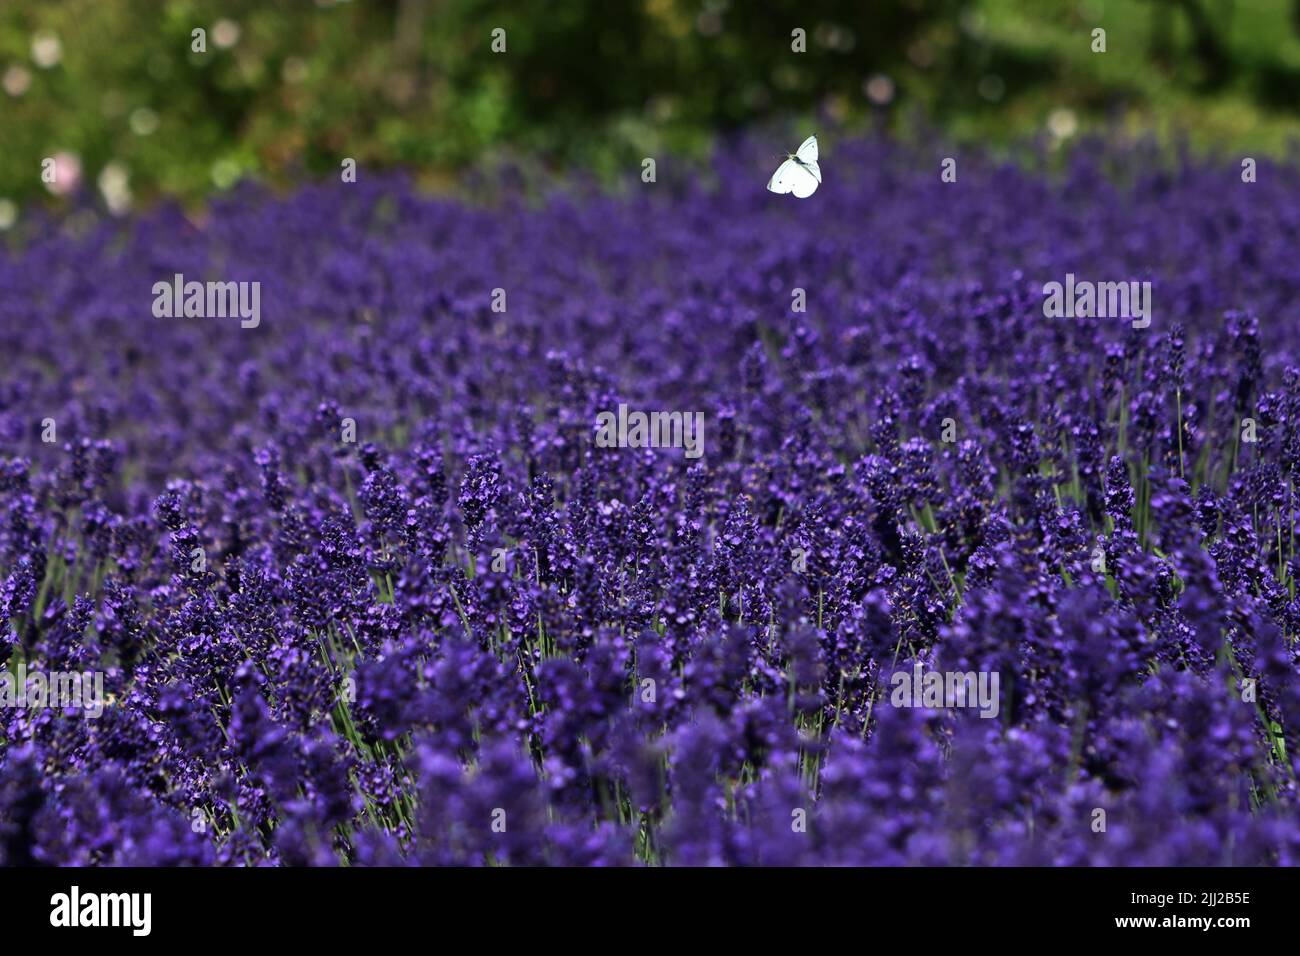 Rosendals garden (In Swedish: Rosendals trädgård) in the city of Stockholm, Sweden. In the picture: Butterfly by garden lavender in the garden. Stock Photo